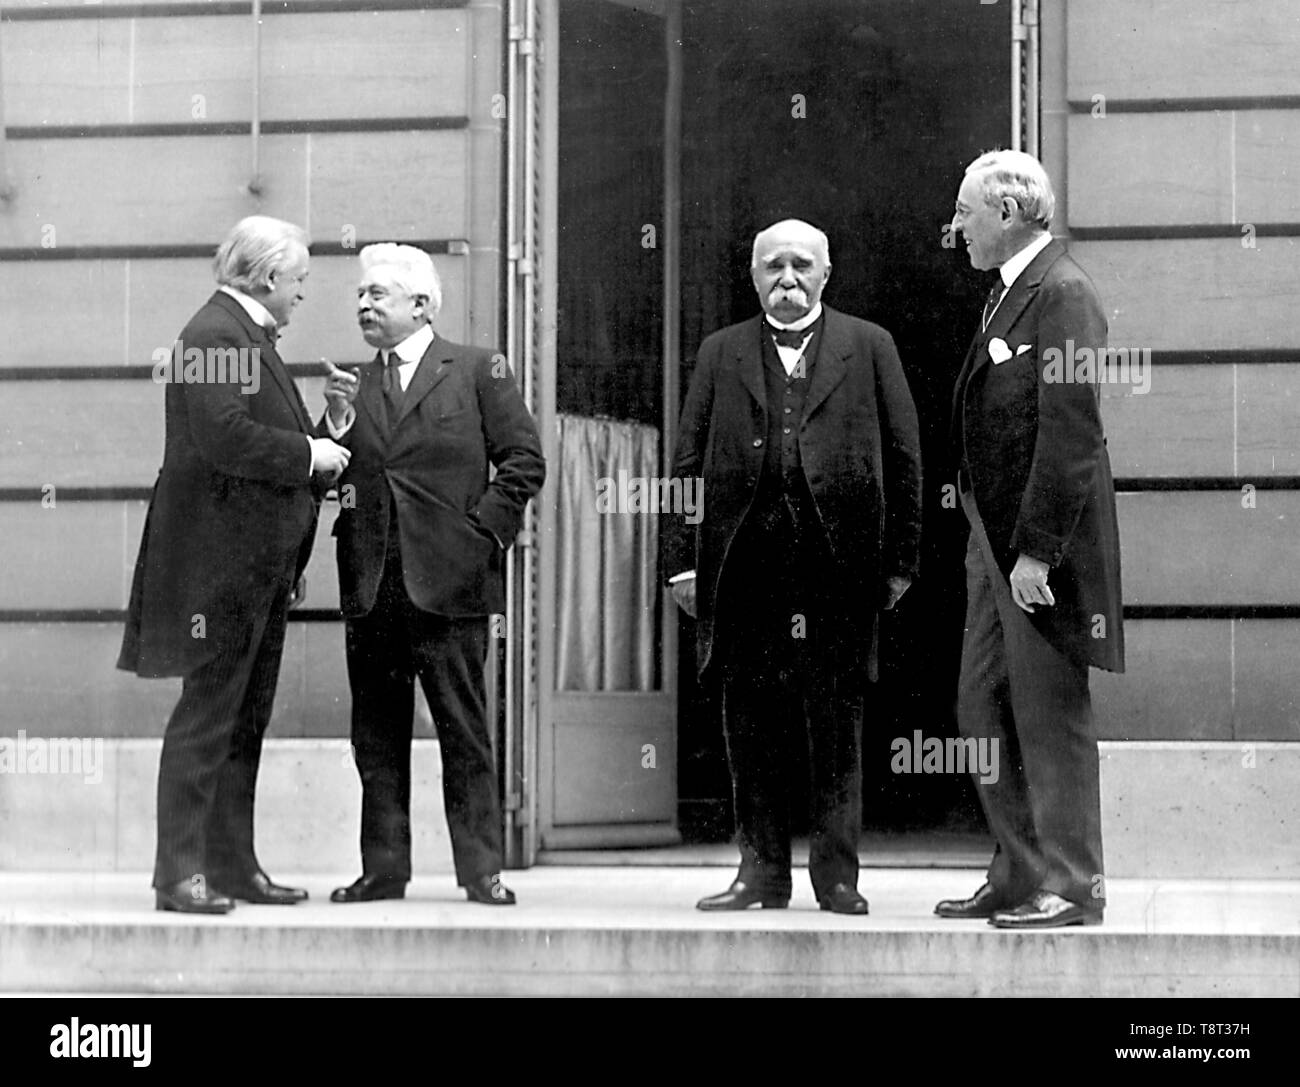 Paris Peace Conference, 27 May 1919. Left to right: David Lloyd George, Vittorio Orlando, Georges Clemenceau, and Woodrow Wilson Edward N. Jackson (US Army Signal Corps) - U.S. Signal Corps photo Council of Four at the WWI Paris peace conference, May 27, 1919 (candid photo) (L - R) Prime Minister David Lloyd George (Great Britian) Premier Vittorio Orlando, Italy, French Premier Georges Clemenceau, President Woodrow Wilson Stock Photo